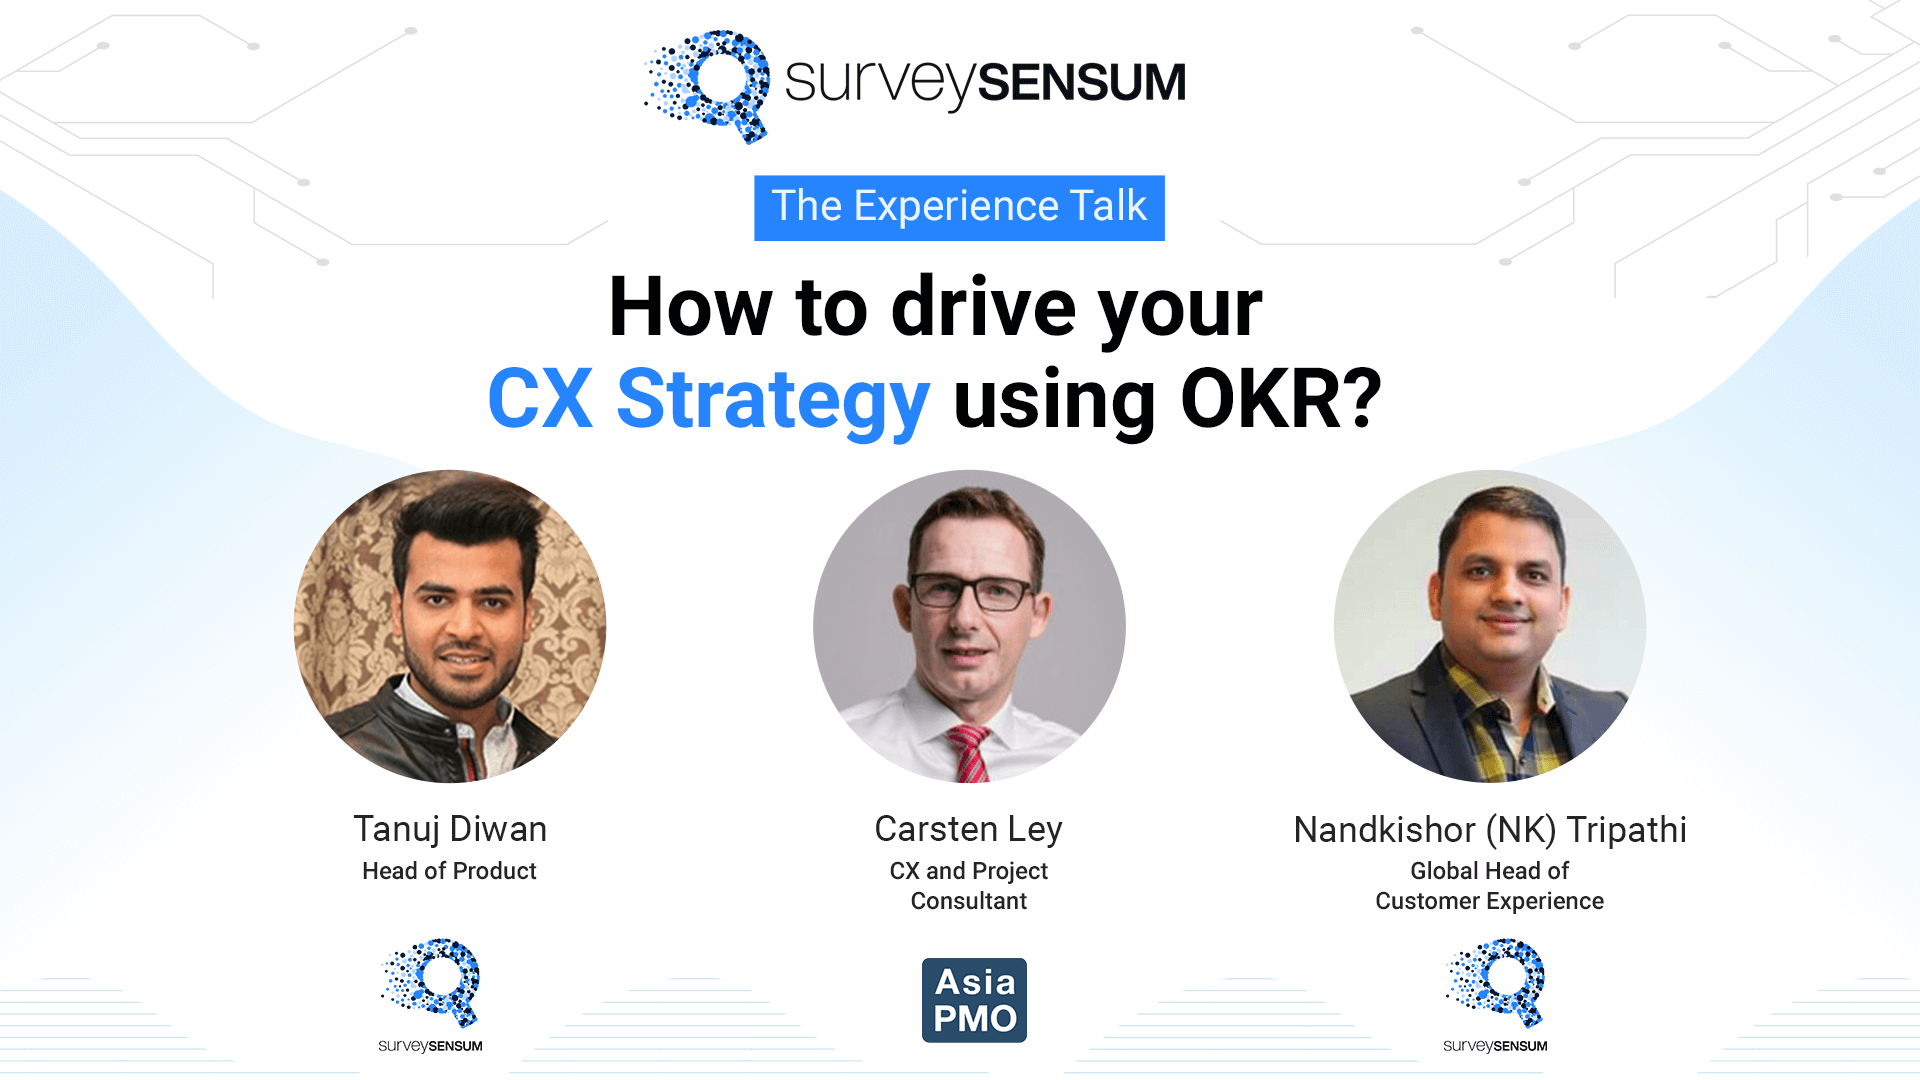 How to drive your CX Strategy using OKR?